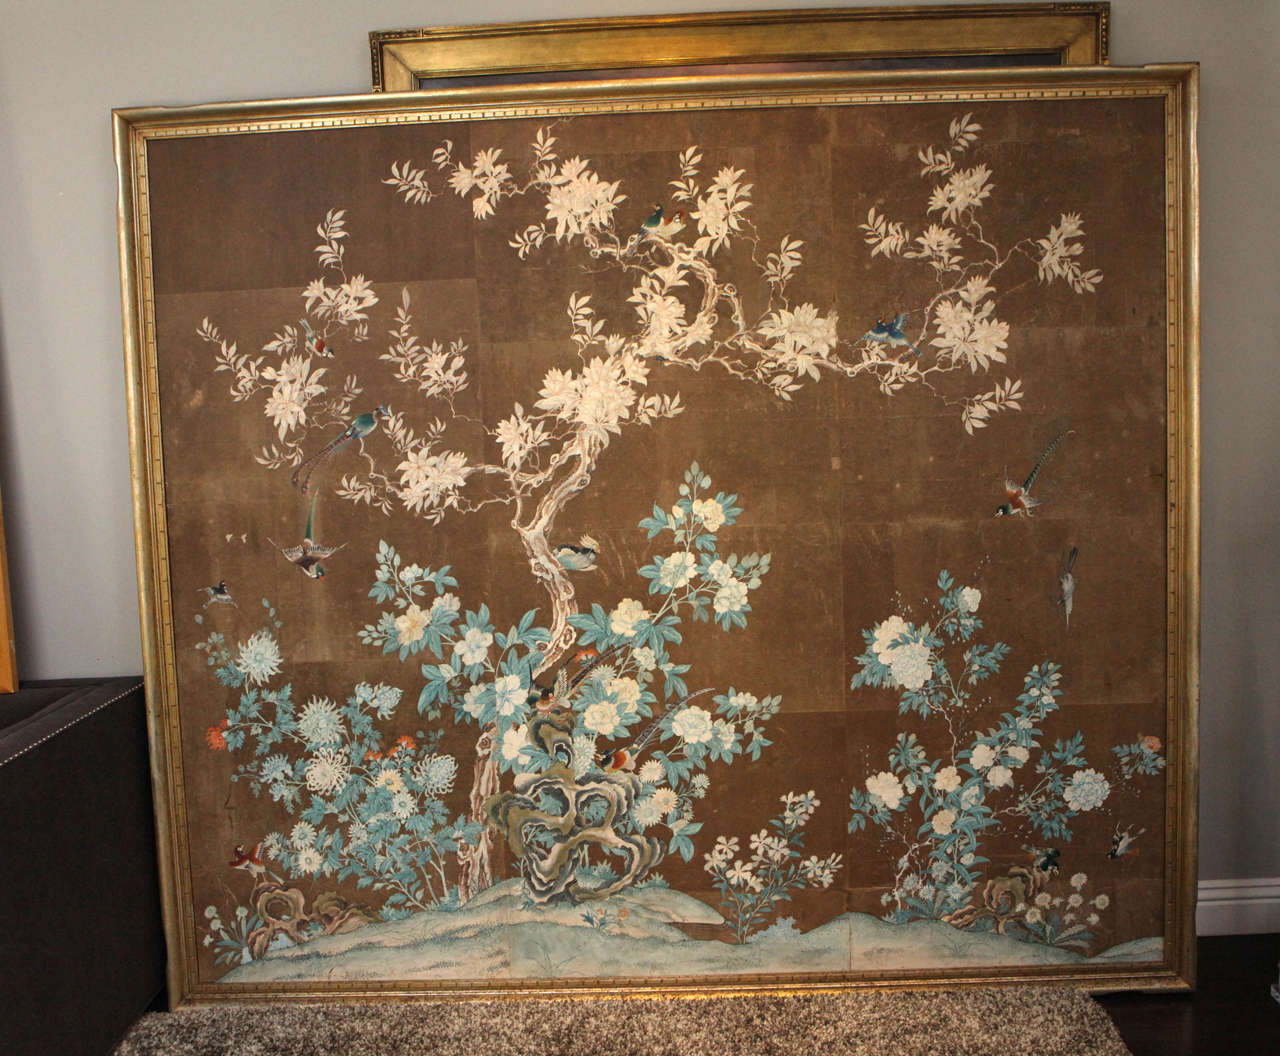 Early 19th century hand-painted Chinese wallpaper panels of colorful birds and foliage. Mounted in giltwood frame.